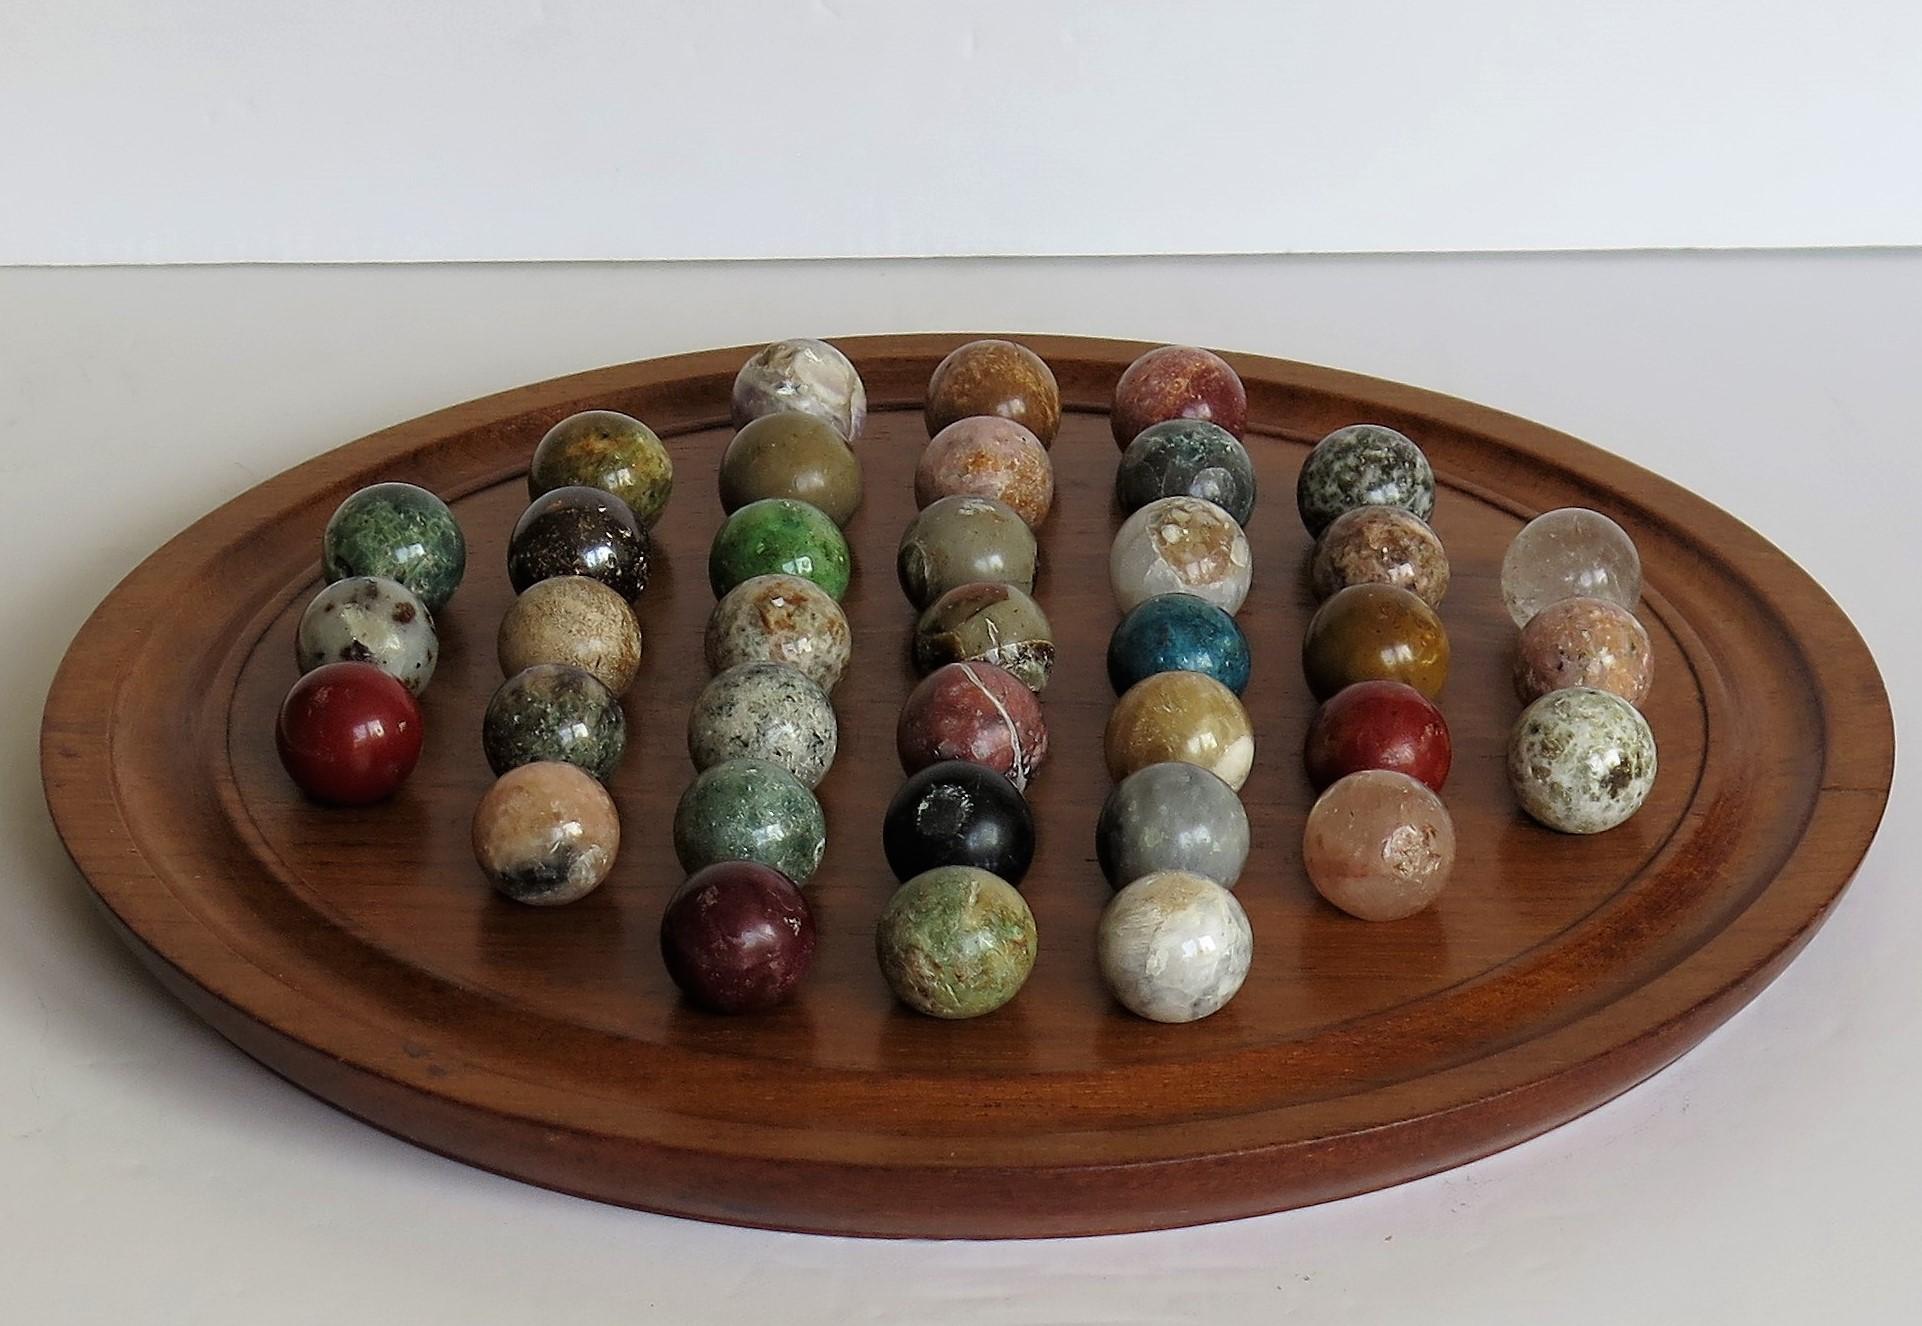 European Fine Marble Solitaire Hardwood Board with 37 Agate Mineral Stone Marbles, French